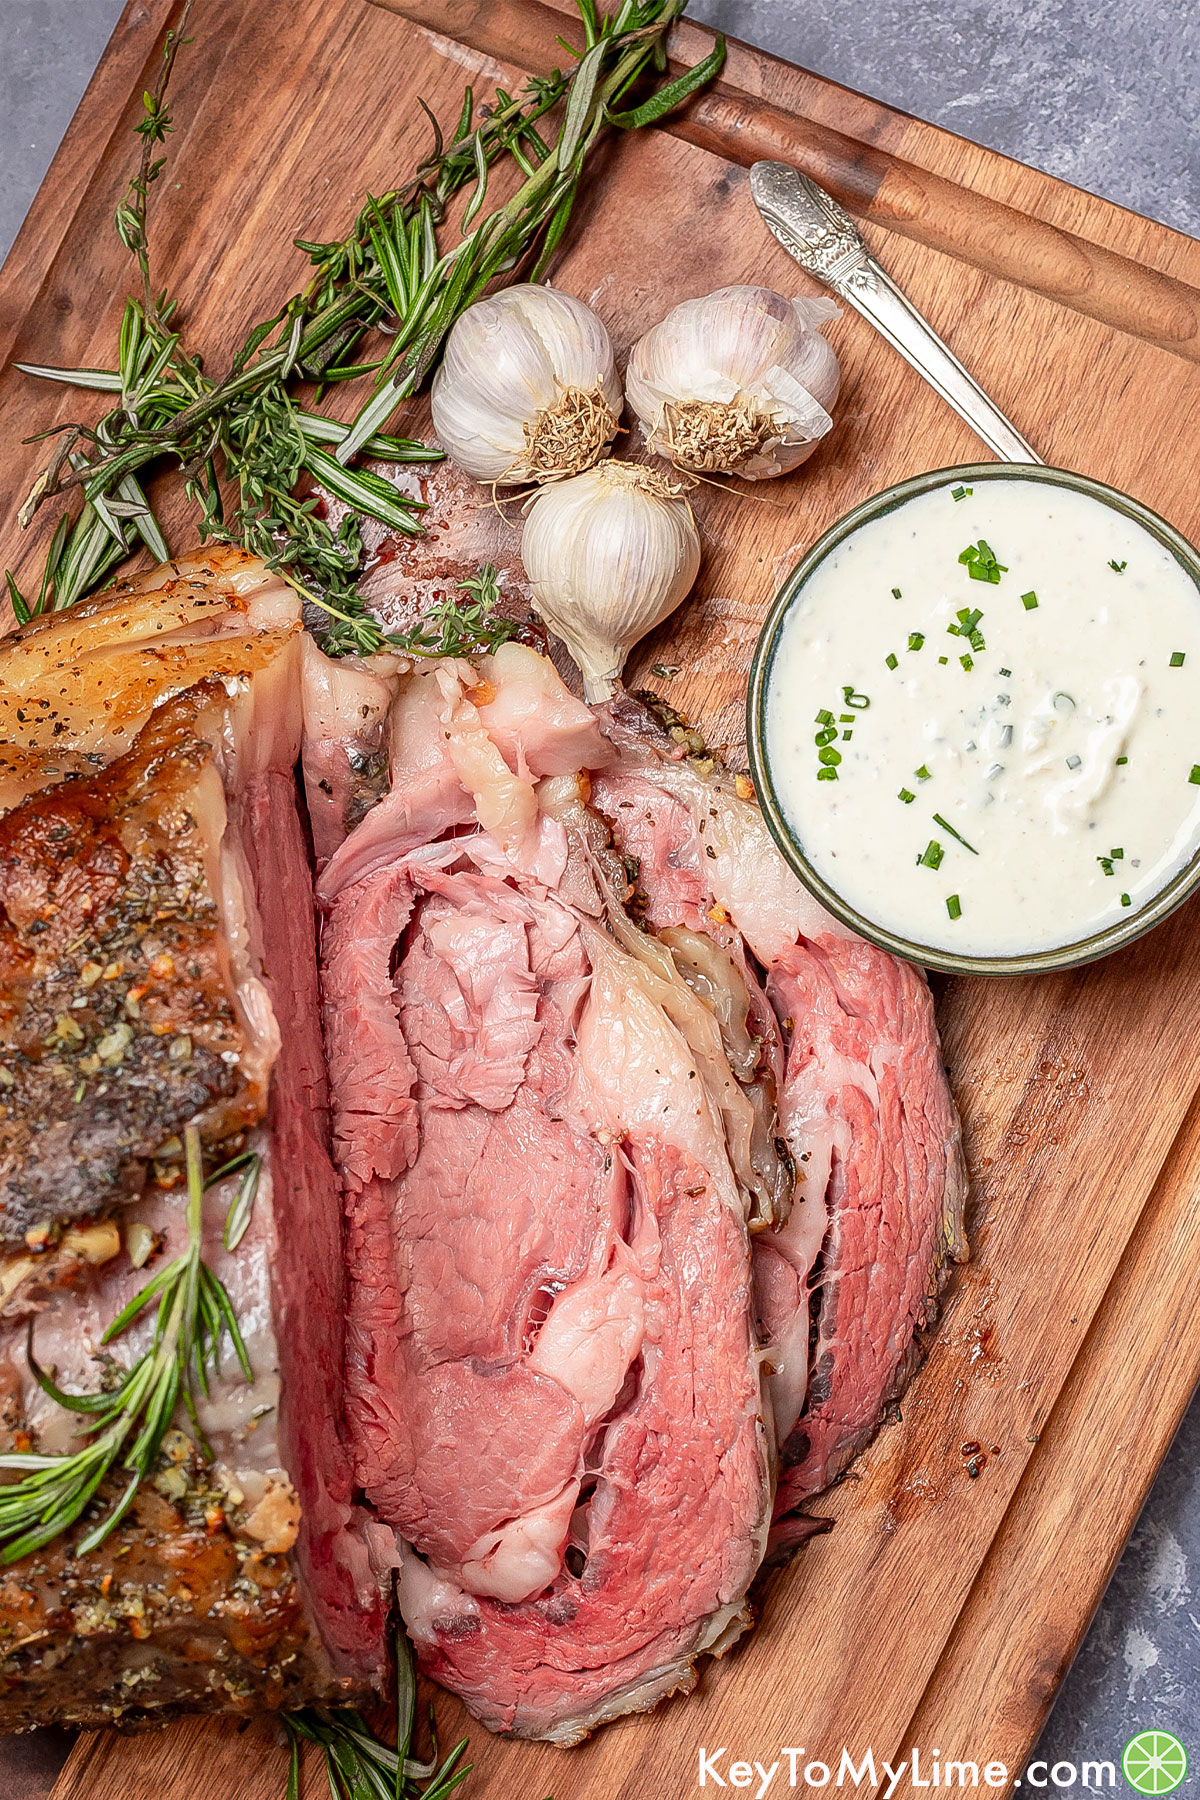 An overhead image of a sliced prime rib roast next to small bowl of garnished horseradish sauce on a cutting board.